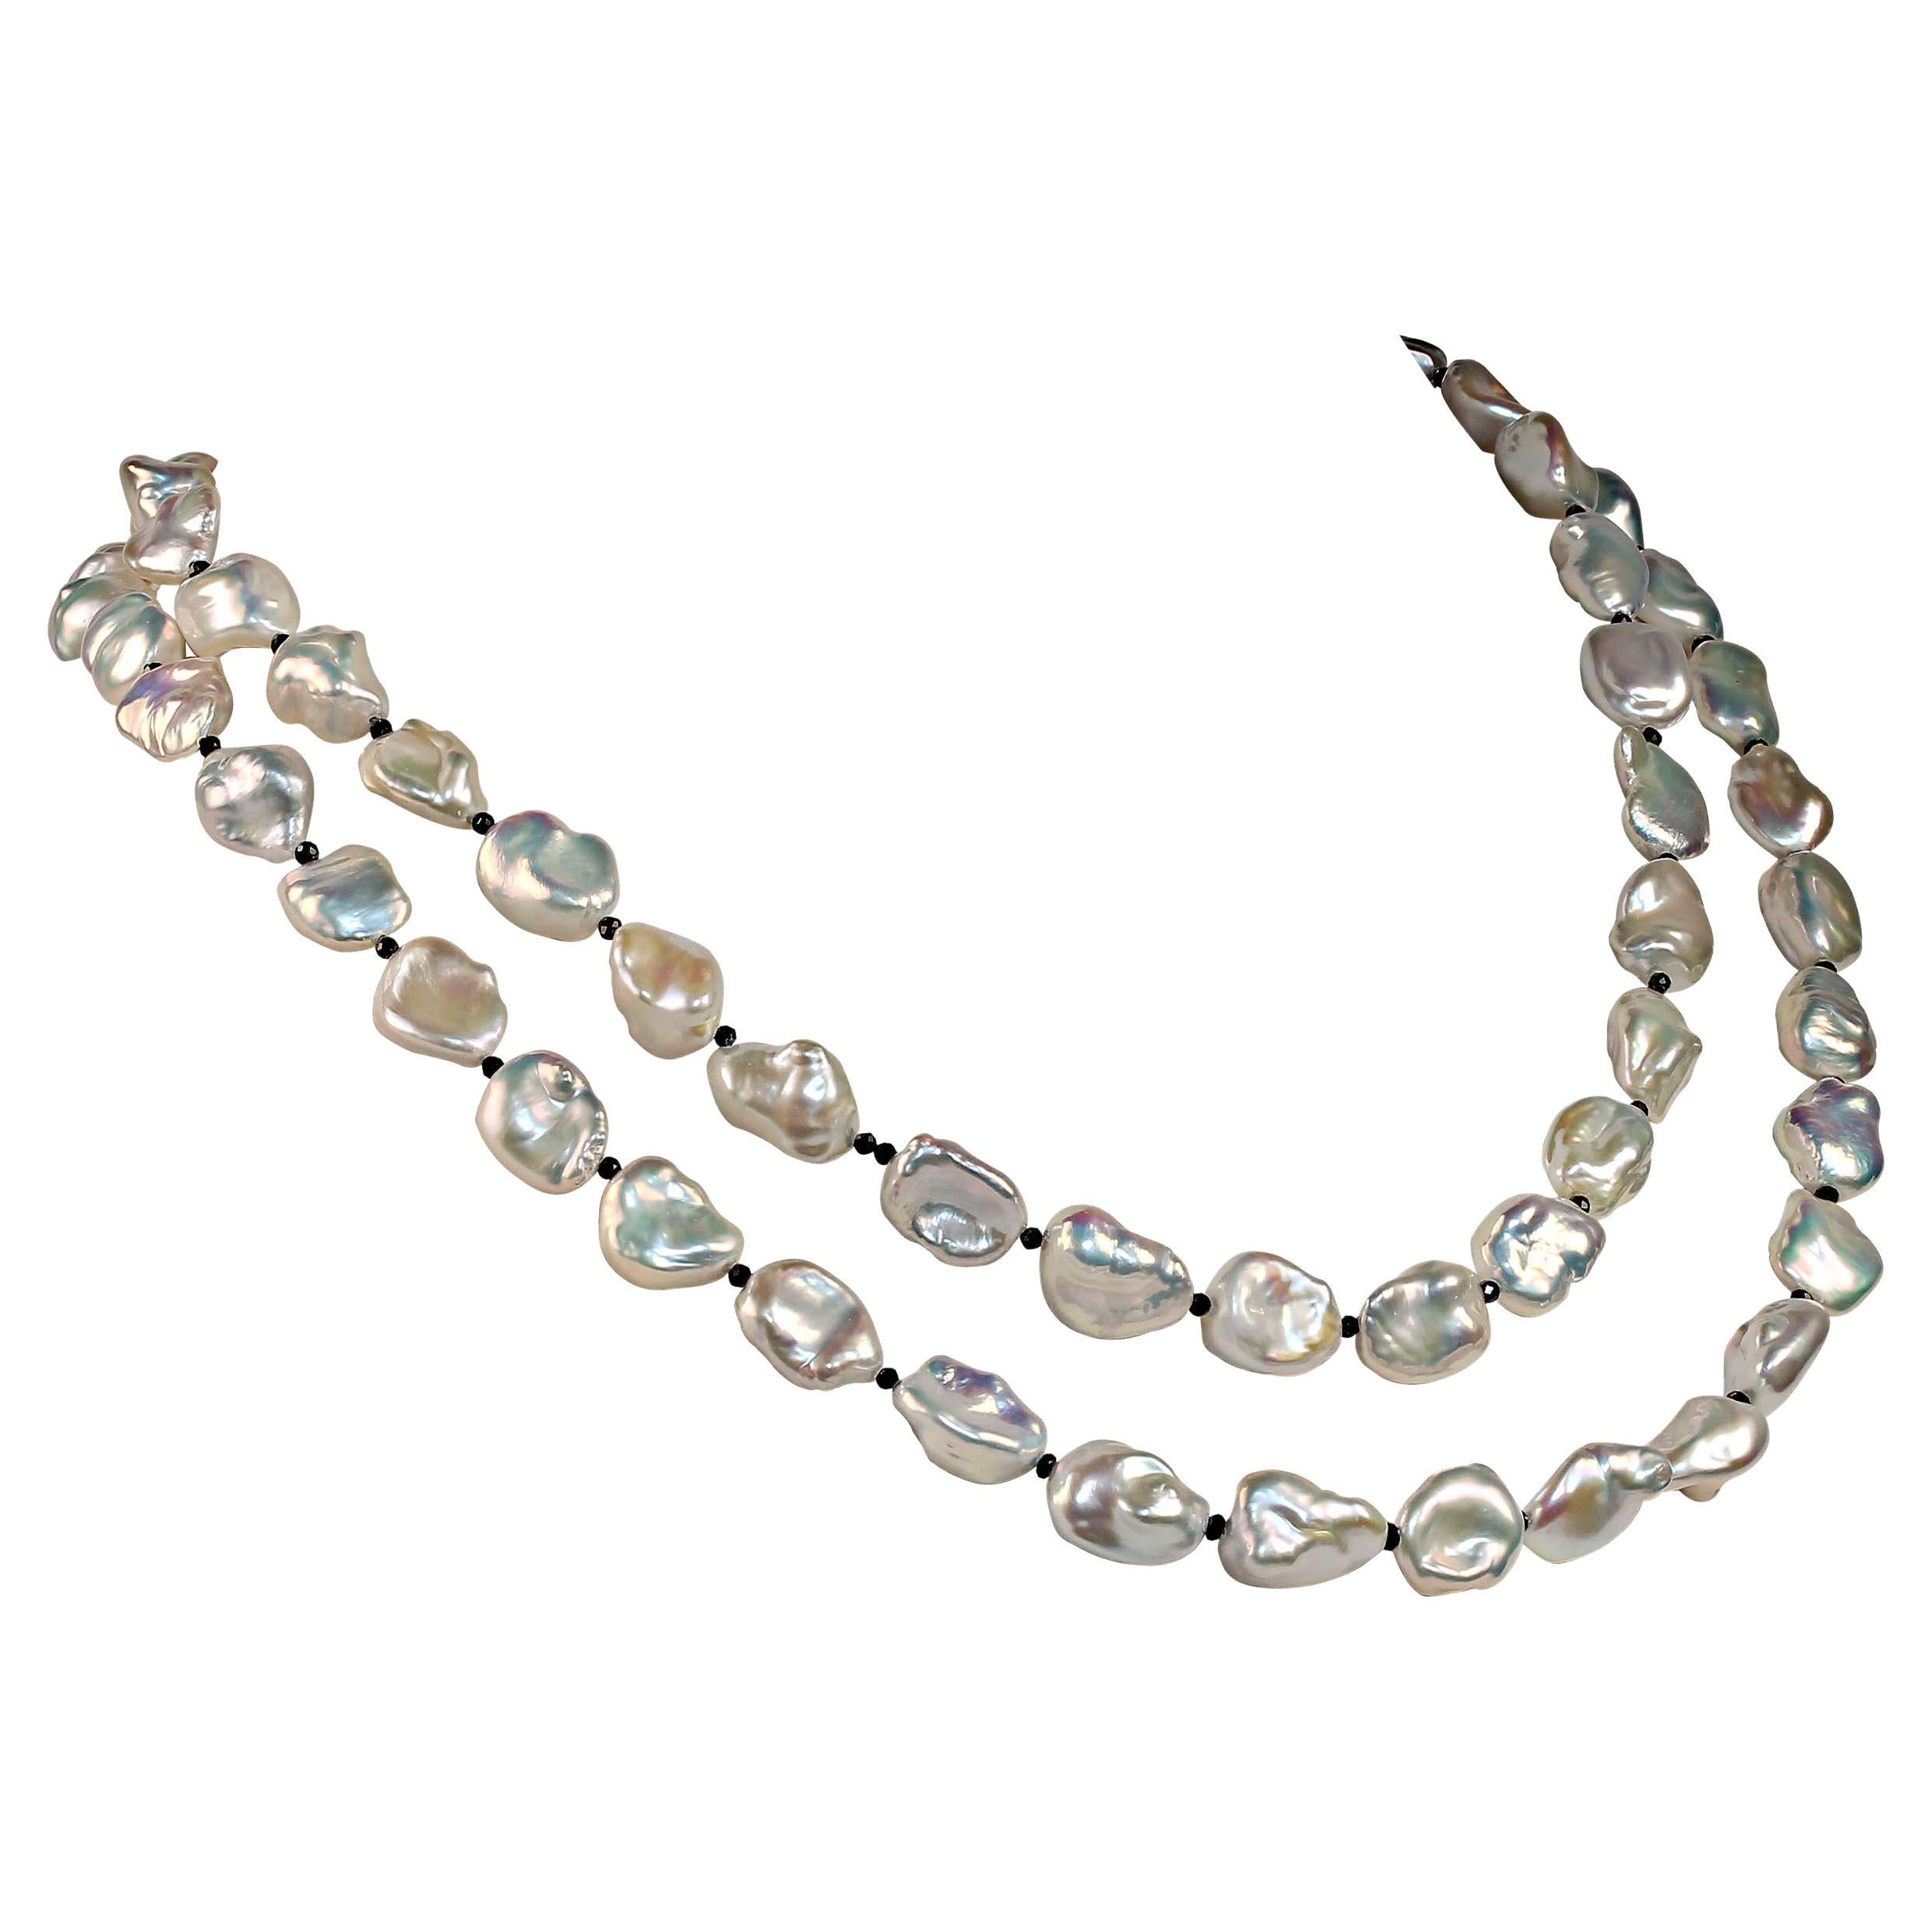 I love these Pearls! They have that unique feel of luxury. This unique necklace shimmers and glows. These Keshi Pearls are from a second Harvest of the mollusk and are simply luscious. They are silvery with great iridescence. Tiny faceted Black